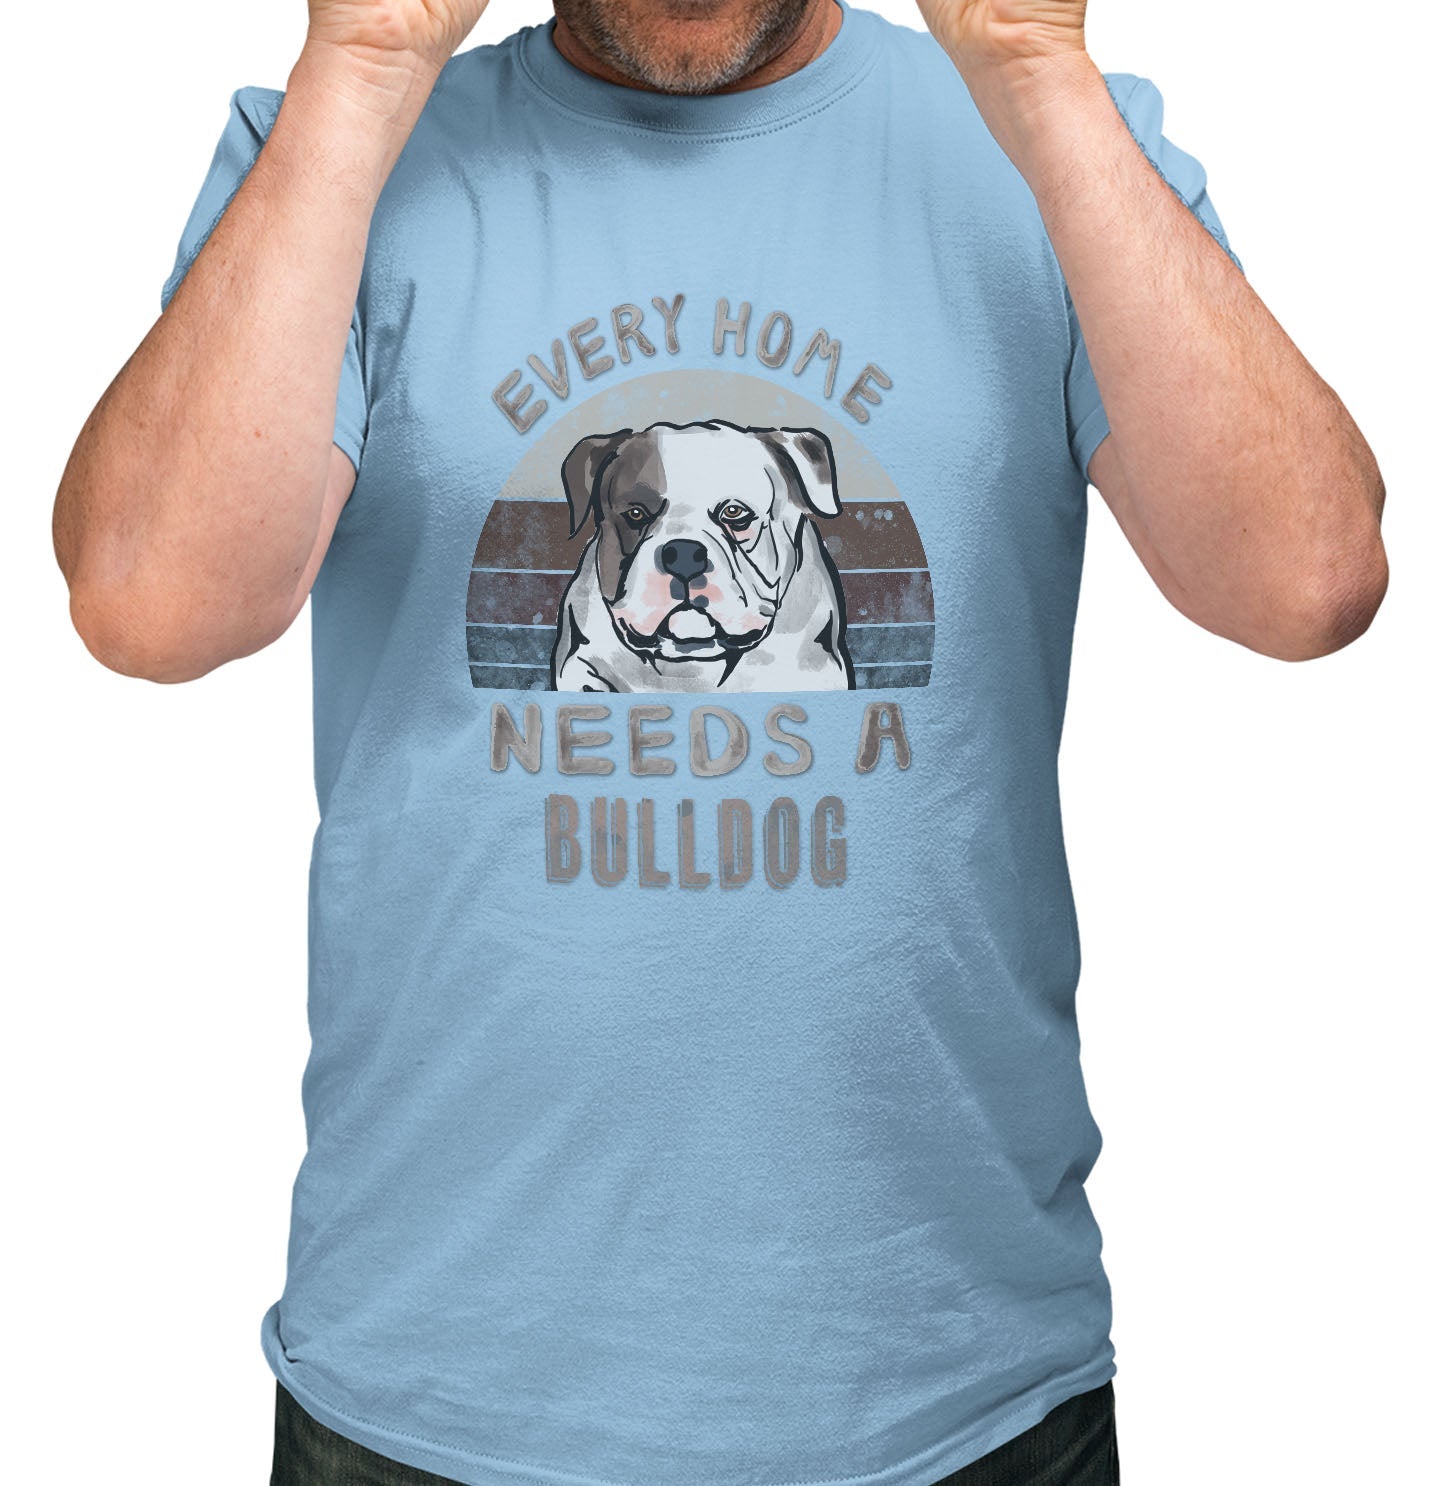 Every Home Needs a American Bulldog - Adult Unisex T-Shirt